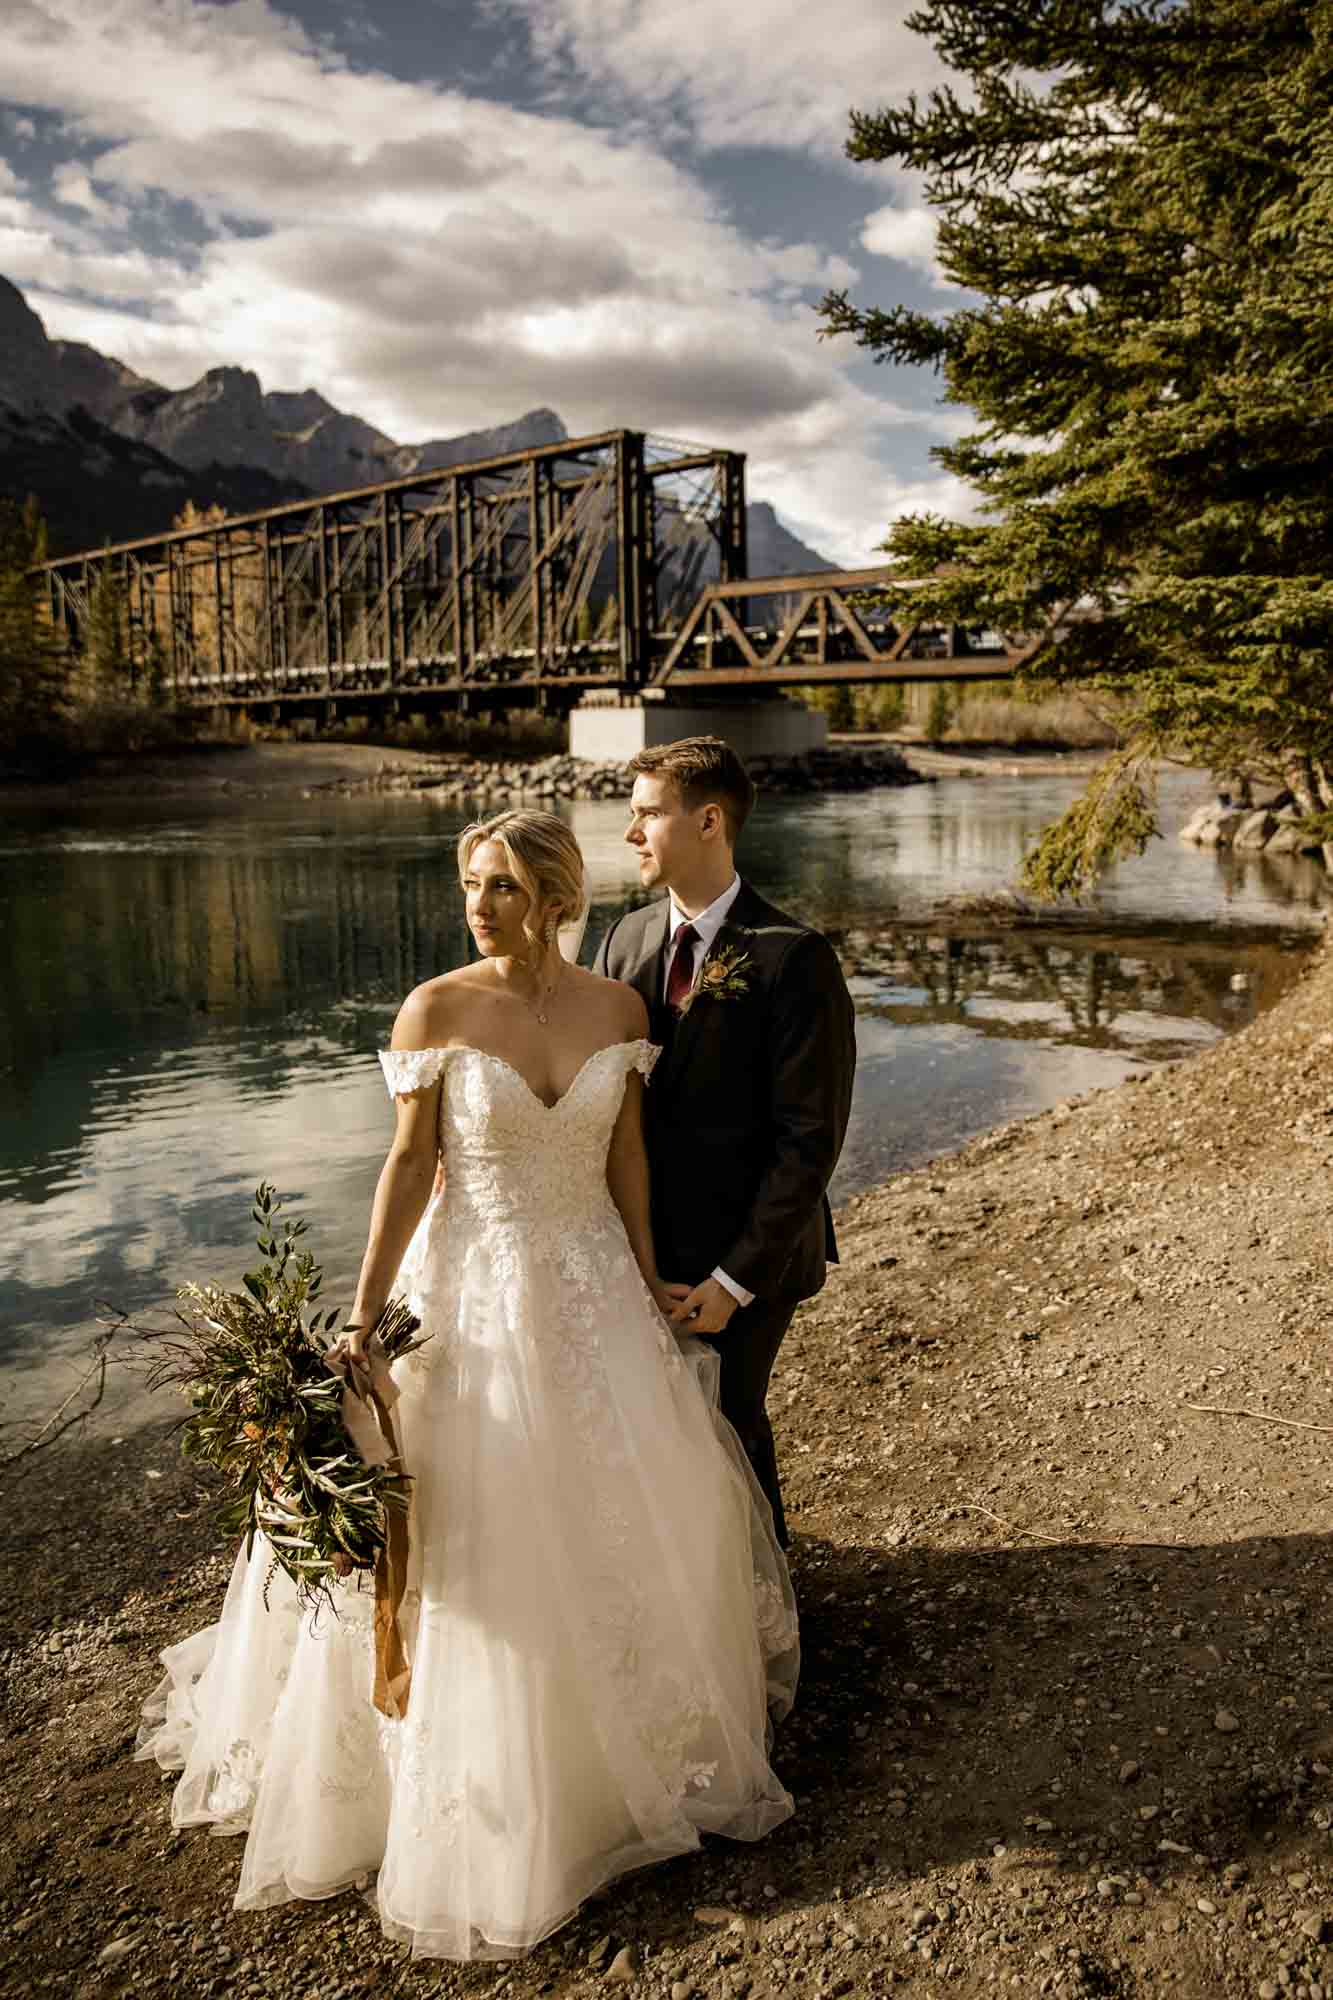 Calgary and Canmore wedding photographer, photography during a wedding at the Bear and Bison Inn in Canmore in the mountains